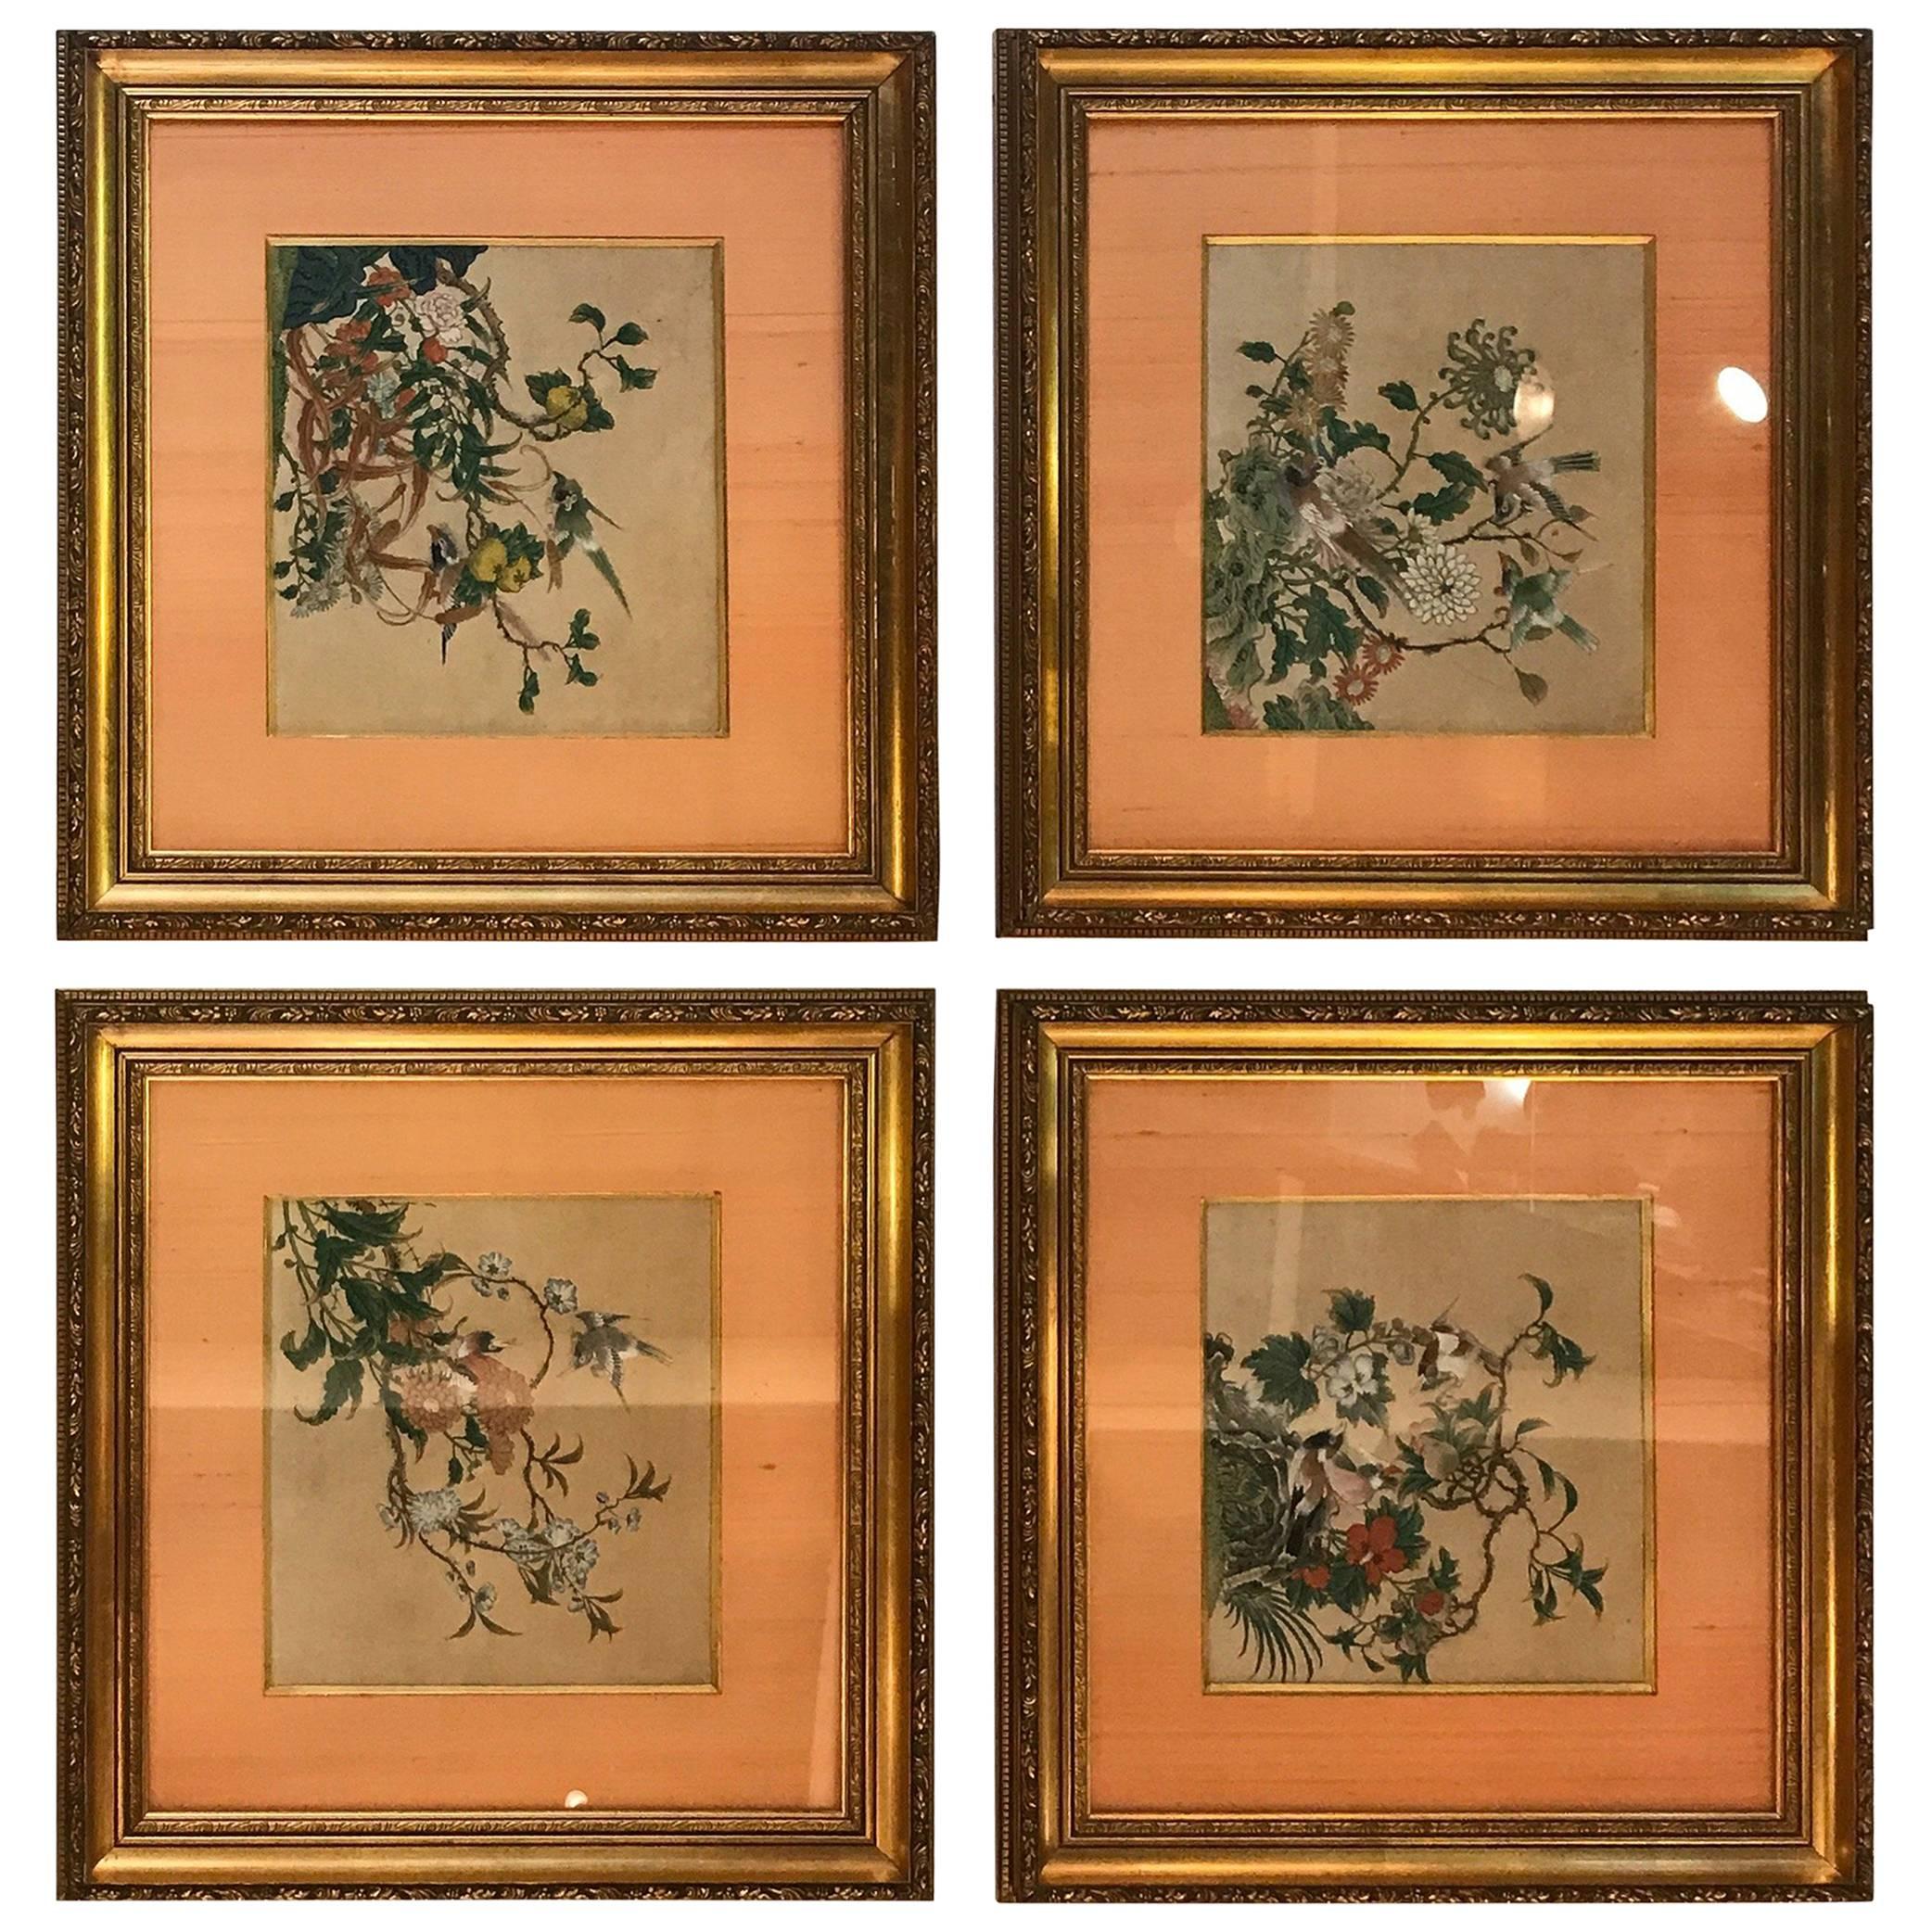 Set of Four Antique Chinese Watercolors, circa 1800